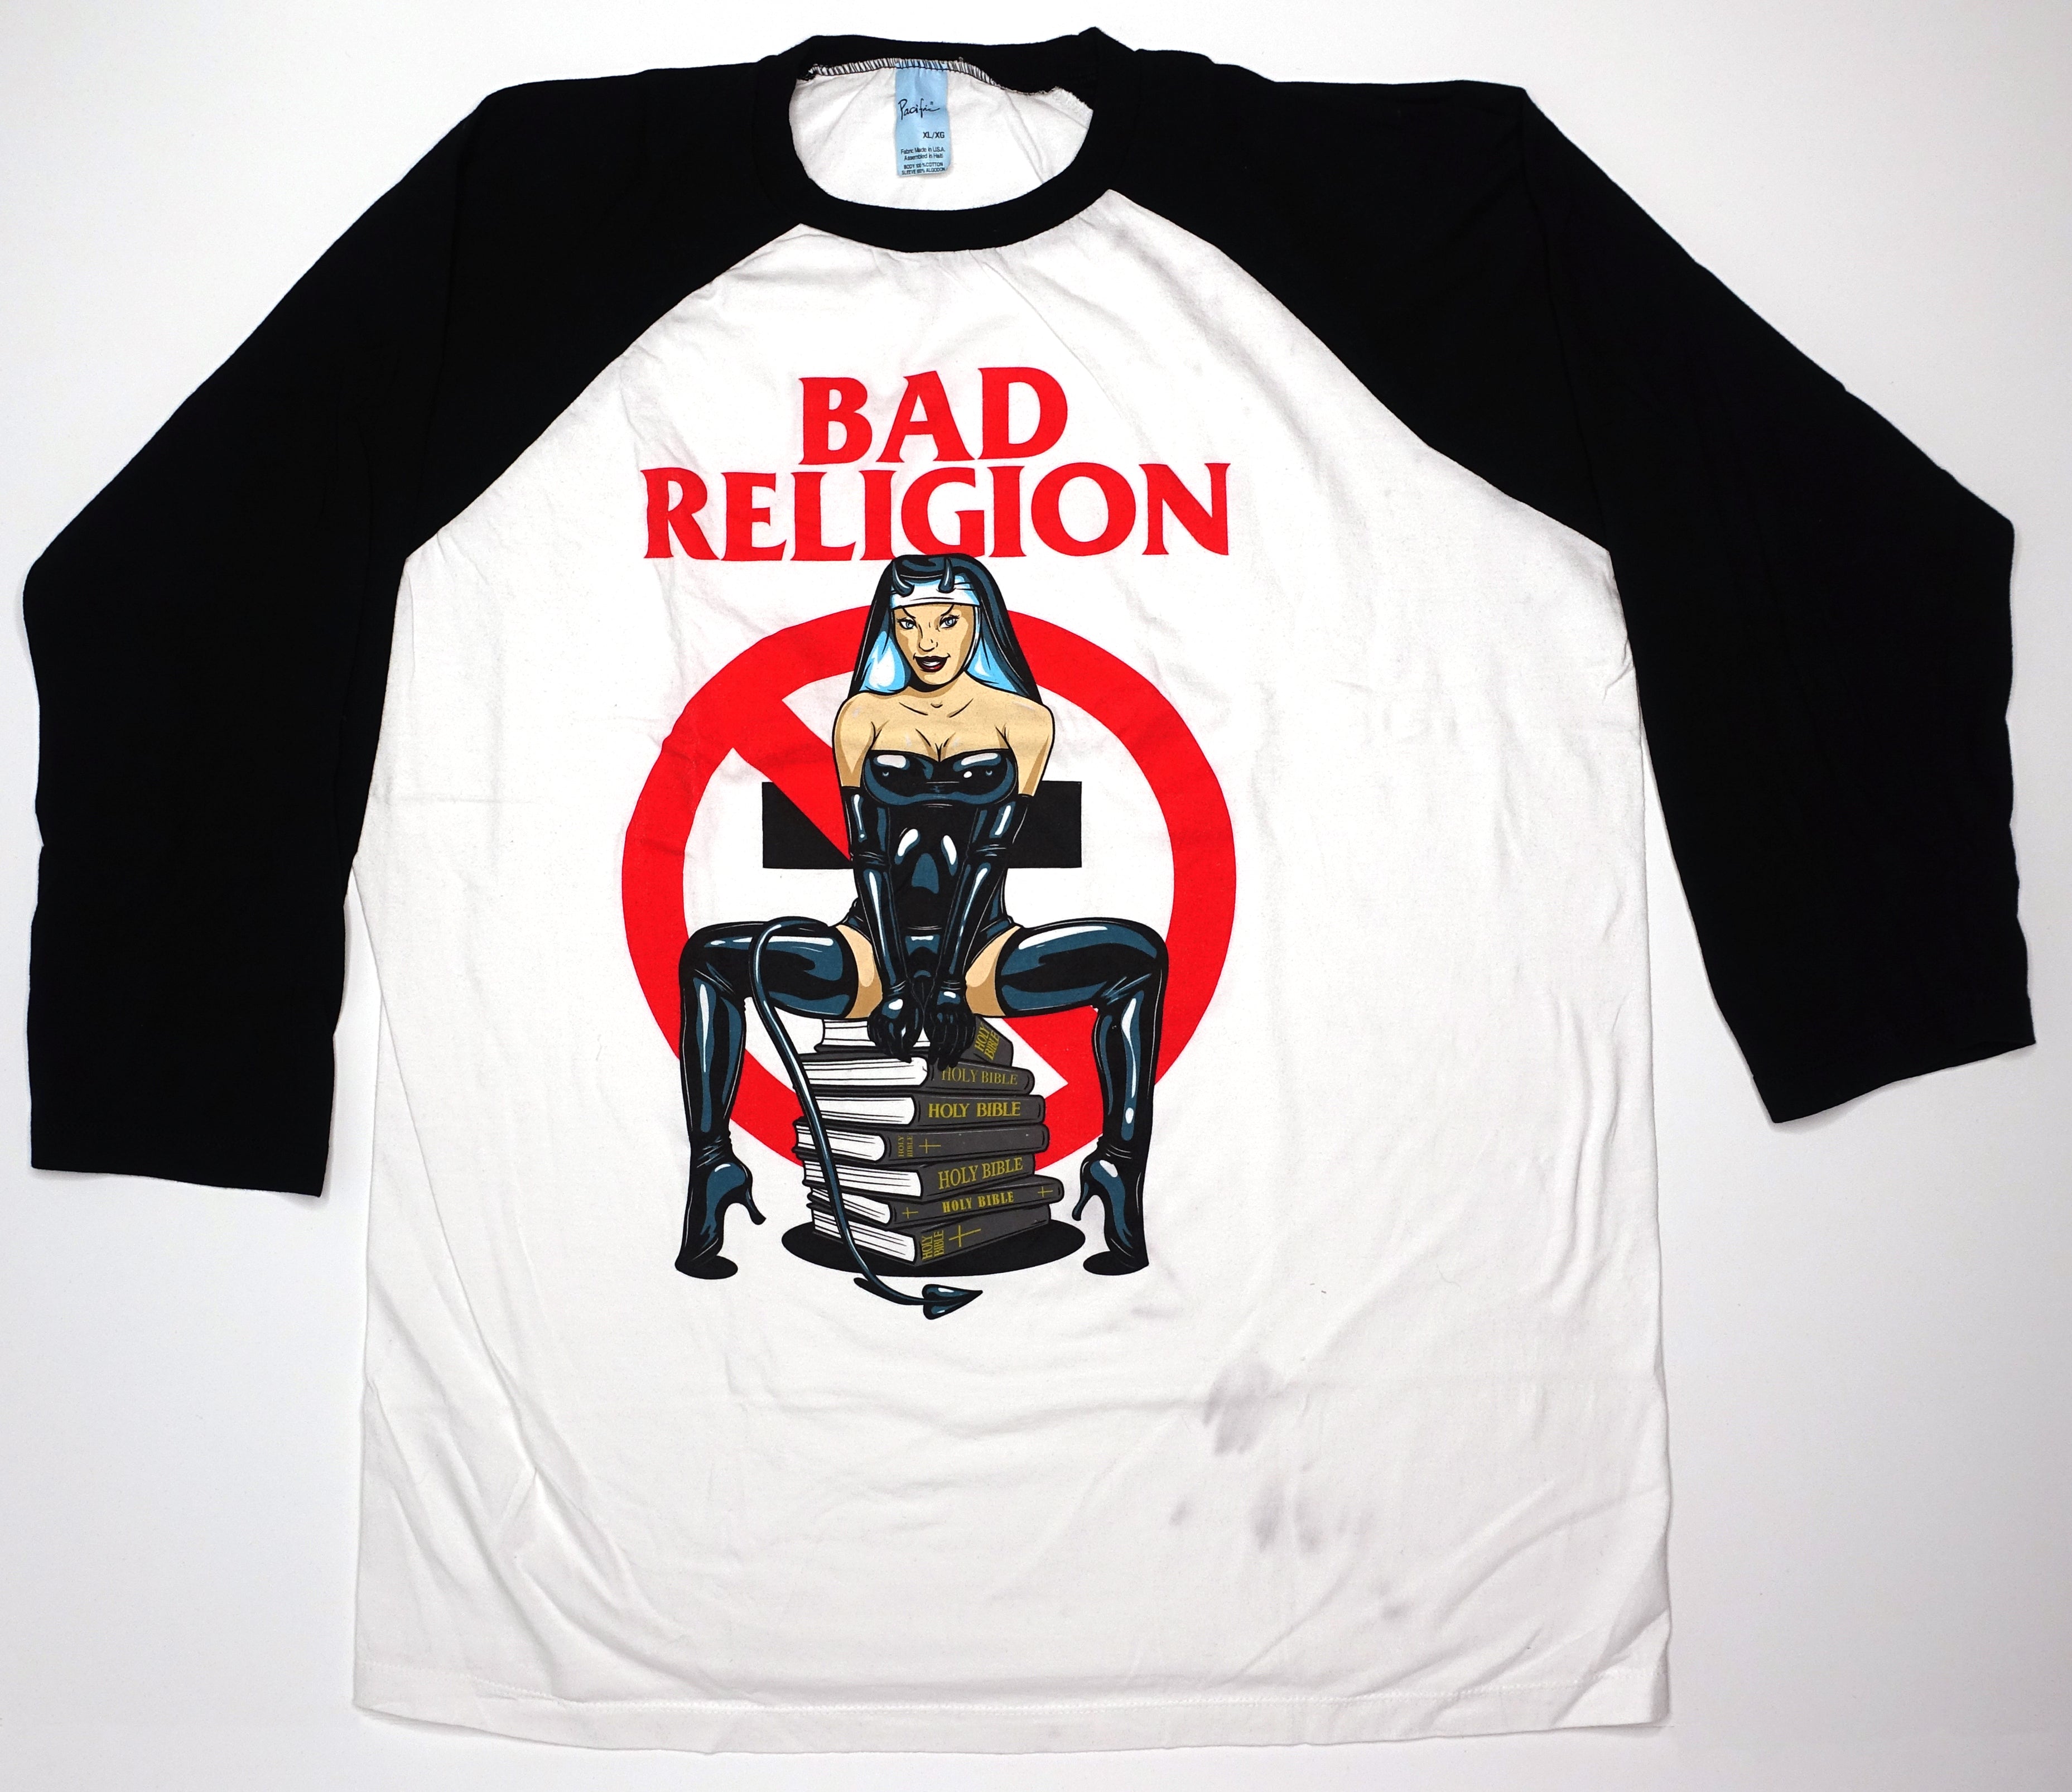 Bad Religion - Dom Nurse On a Stack Of Bibles Jersey Shirt Size XL